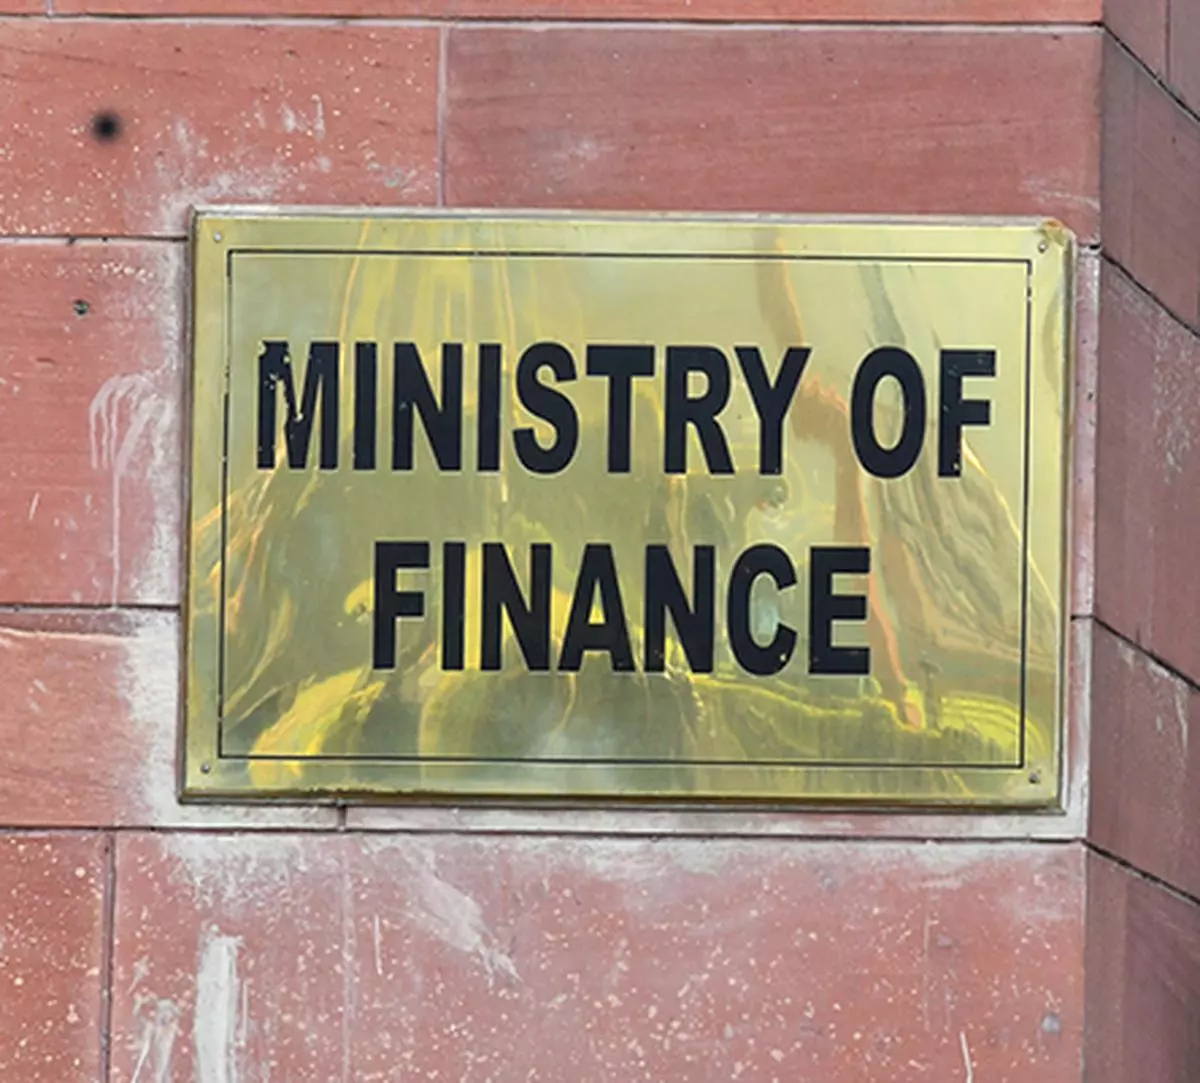 The Finance Ministry and the RBI have kept a close watch over the global situation, said the official